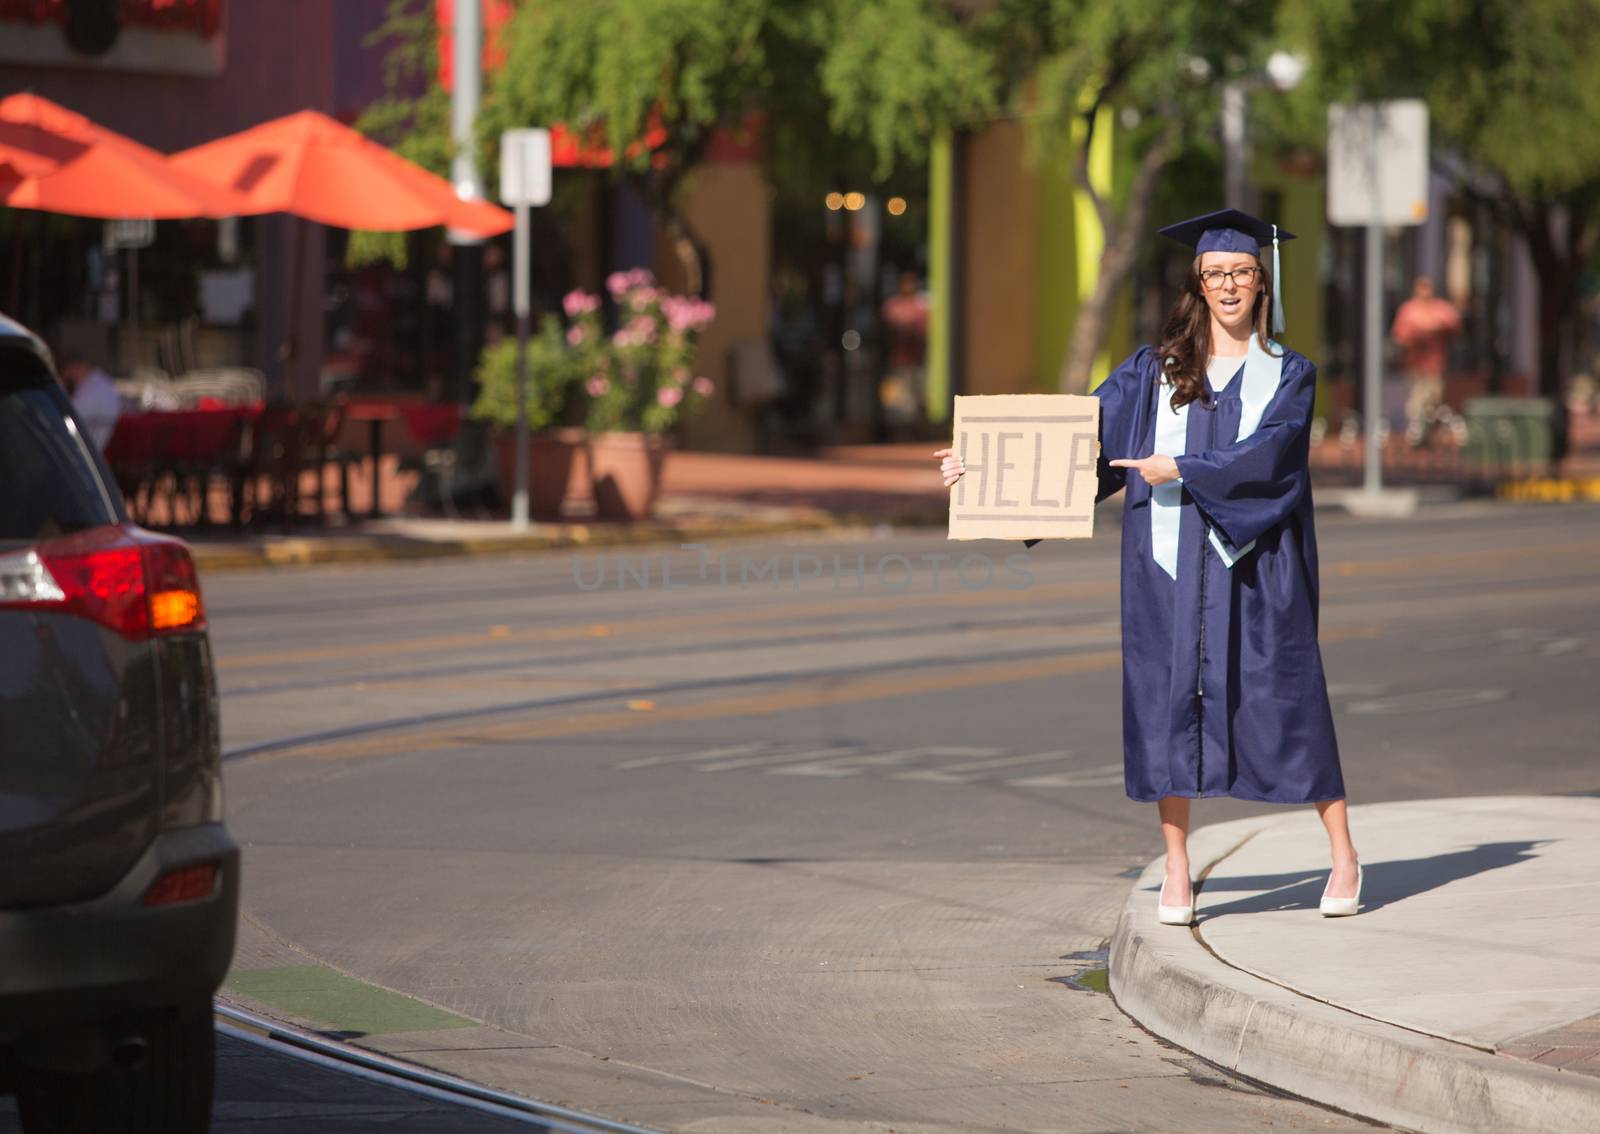 College graduate standing in street with help sign